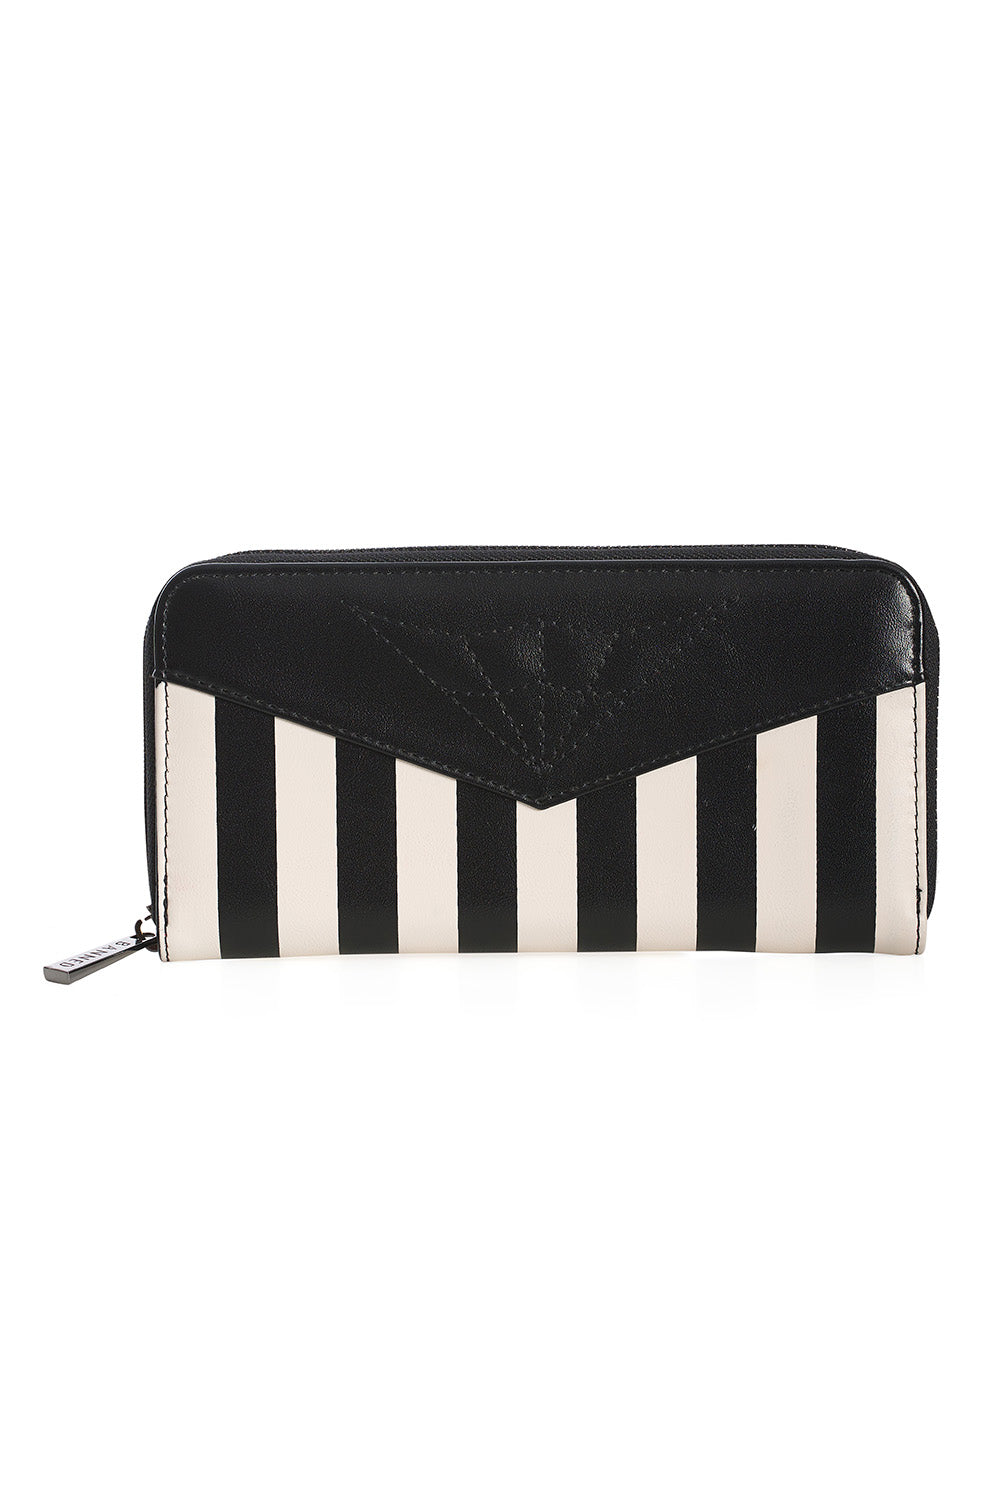 ANOTHER LOST SOUL STRIPED WALLET